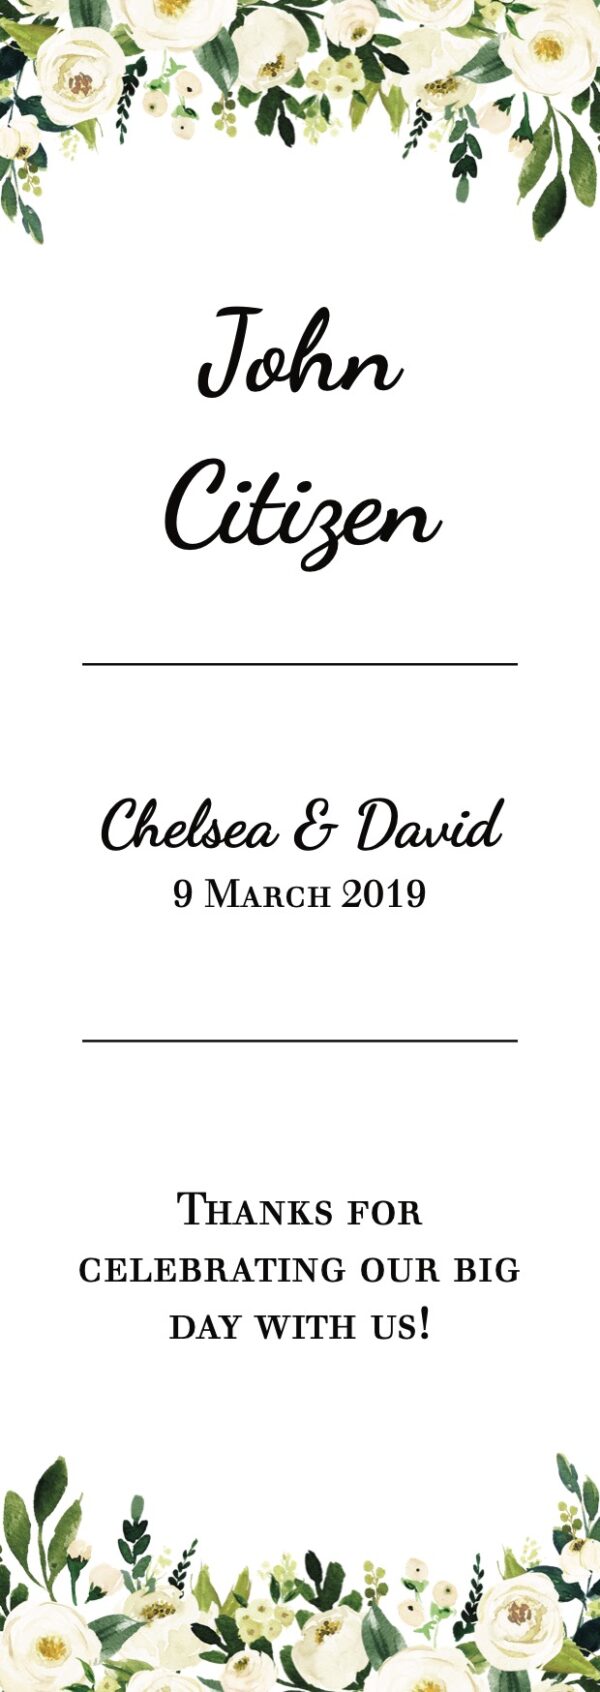 Chelsea Placecard